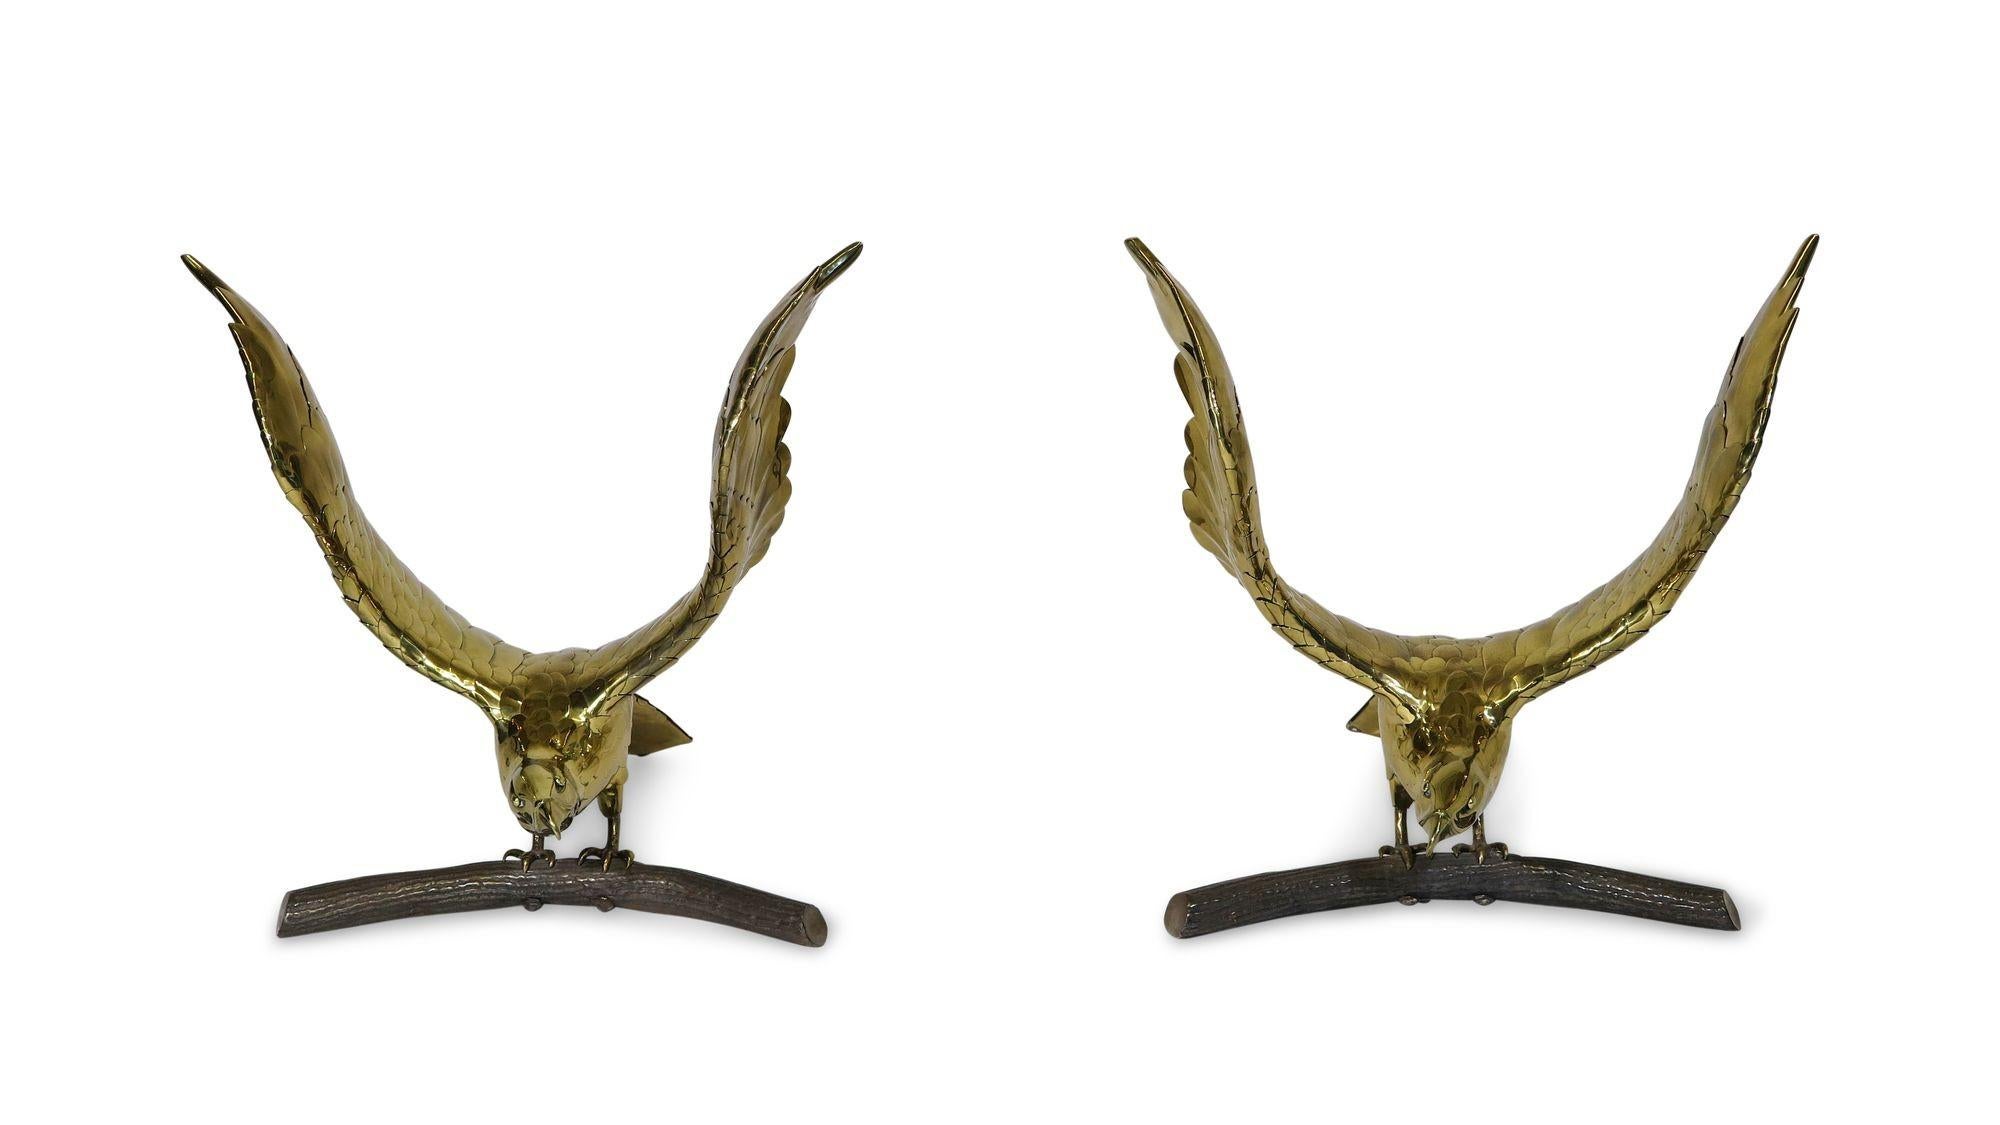 Alain Chervet dining or conference table bases of sculpted brass eagles.
France, 1970
Bases: W 27.25'' x D 29'' x H 28.75''